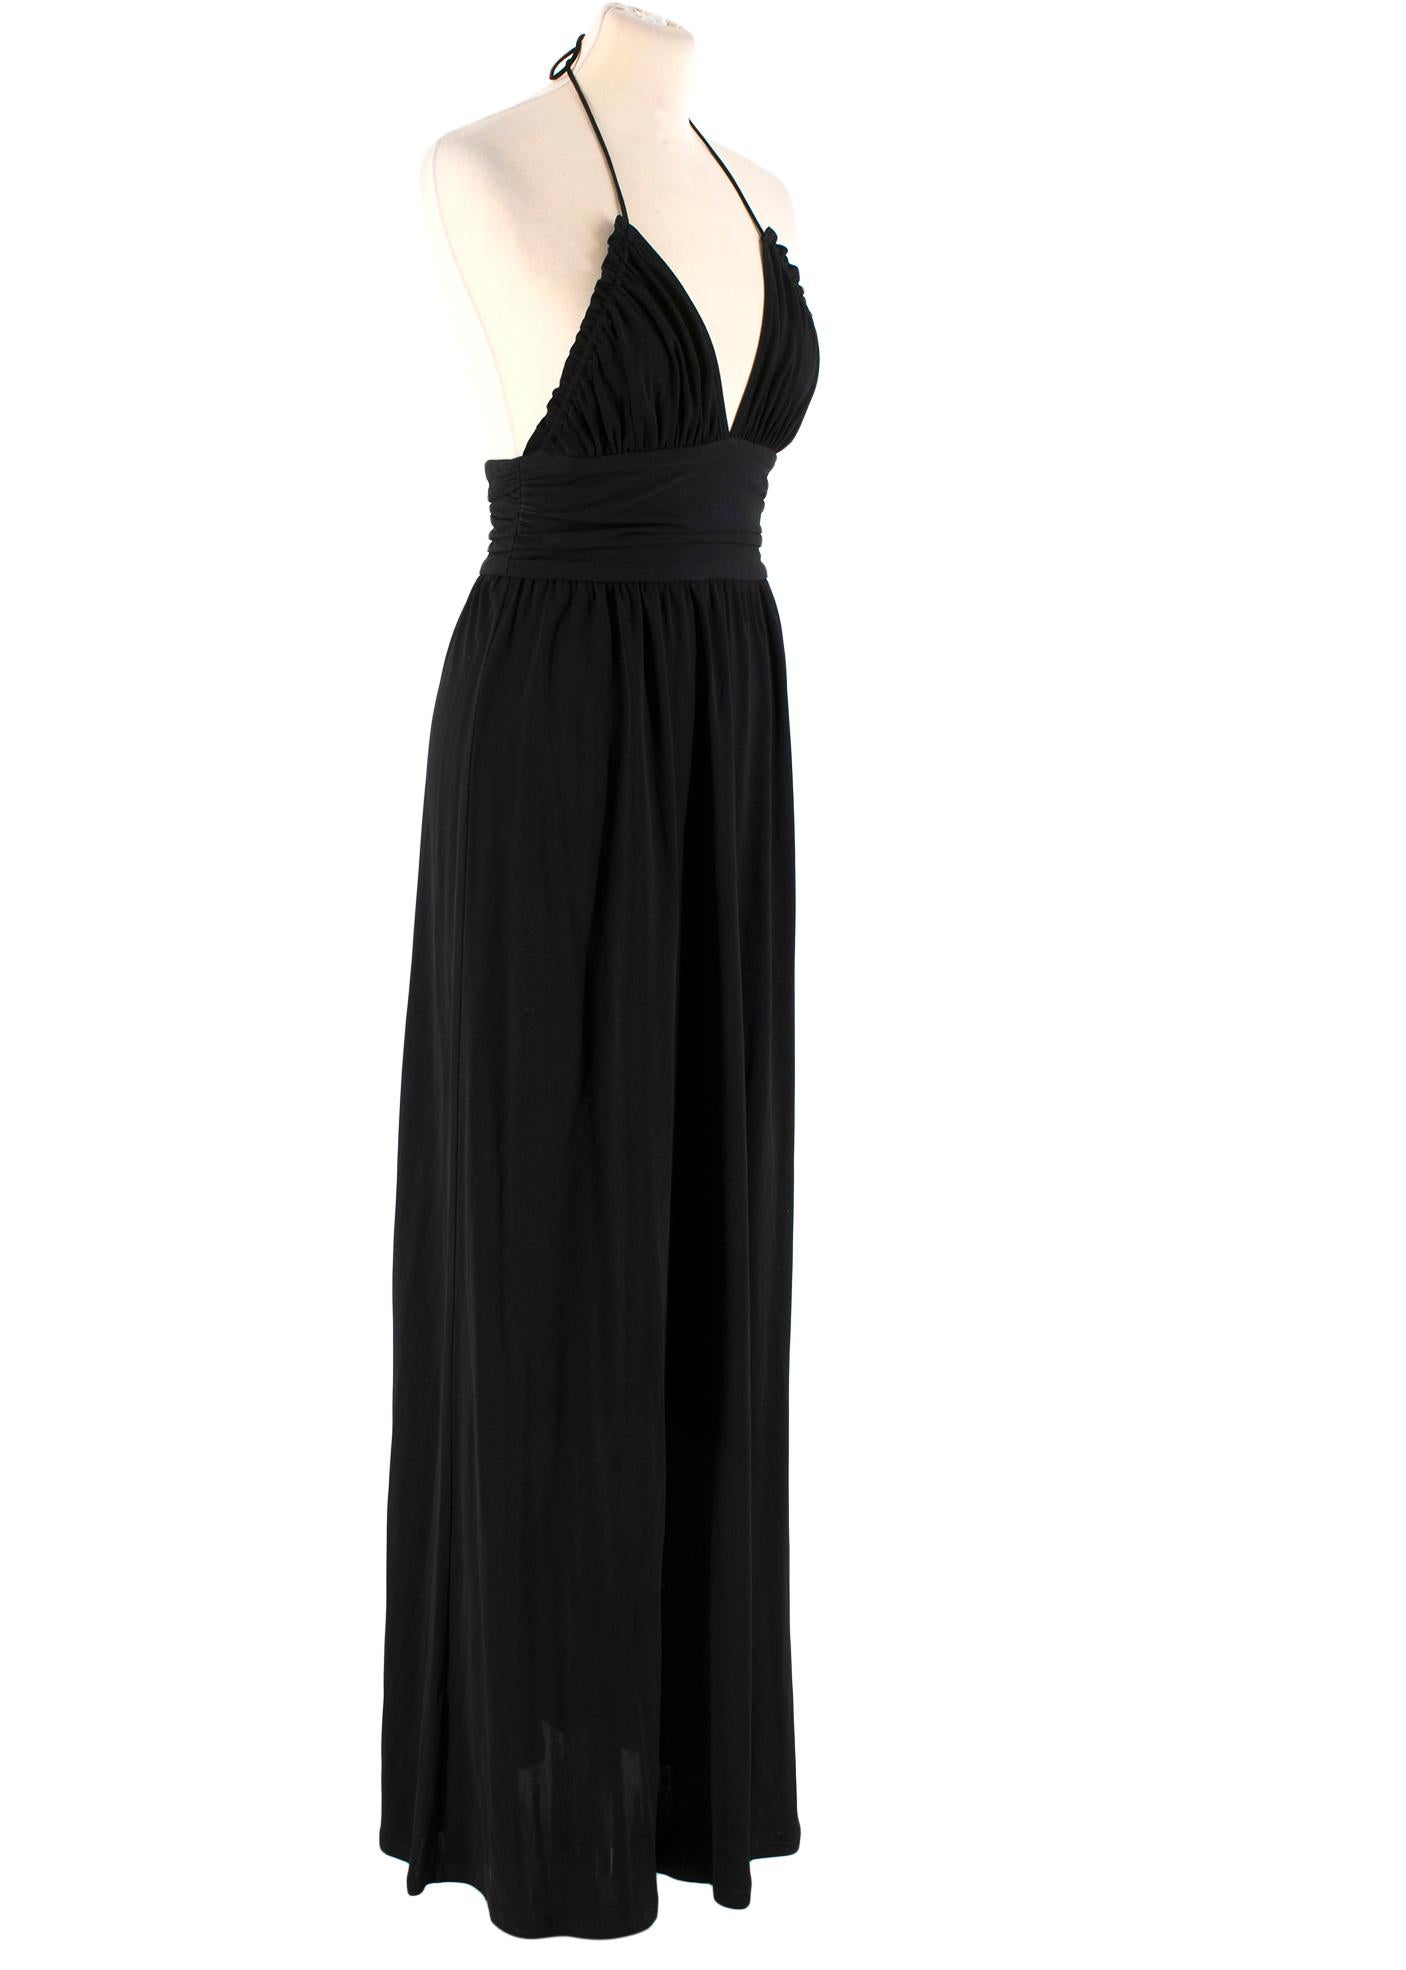 Celine gown made from a stretch-jersey fabric in black colour. Features a sleeveless design, v-neck, ankle length and an open-back. 

- Concealed zip fastening
- Stretchy fabric
- Long length
- 100% viscose rayon
- Dry clean only
- Made in